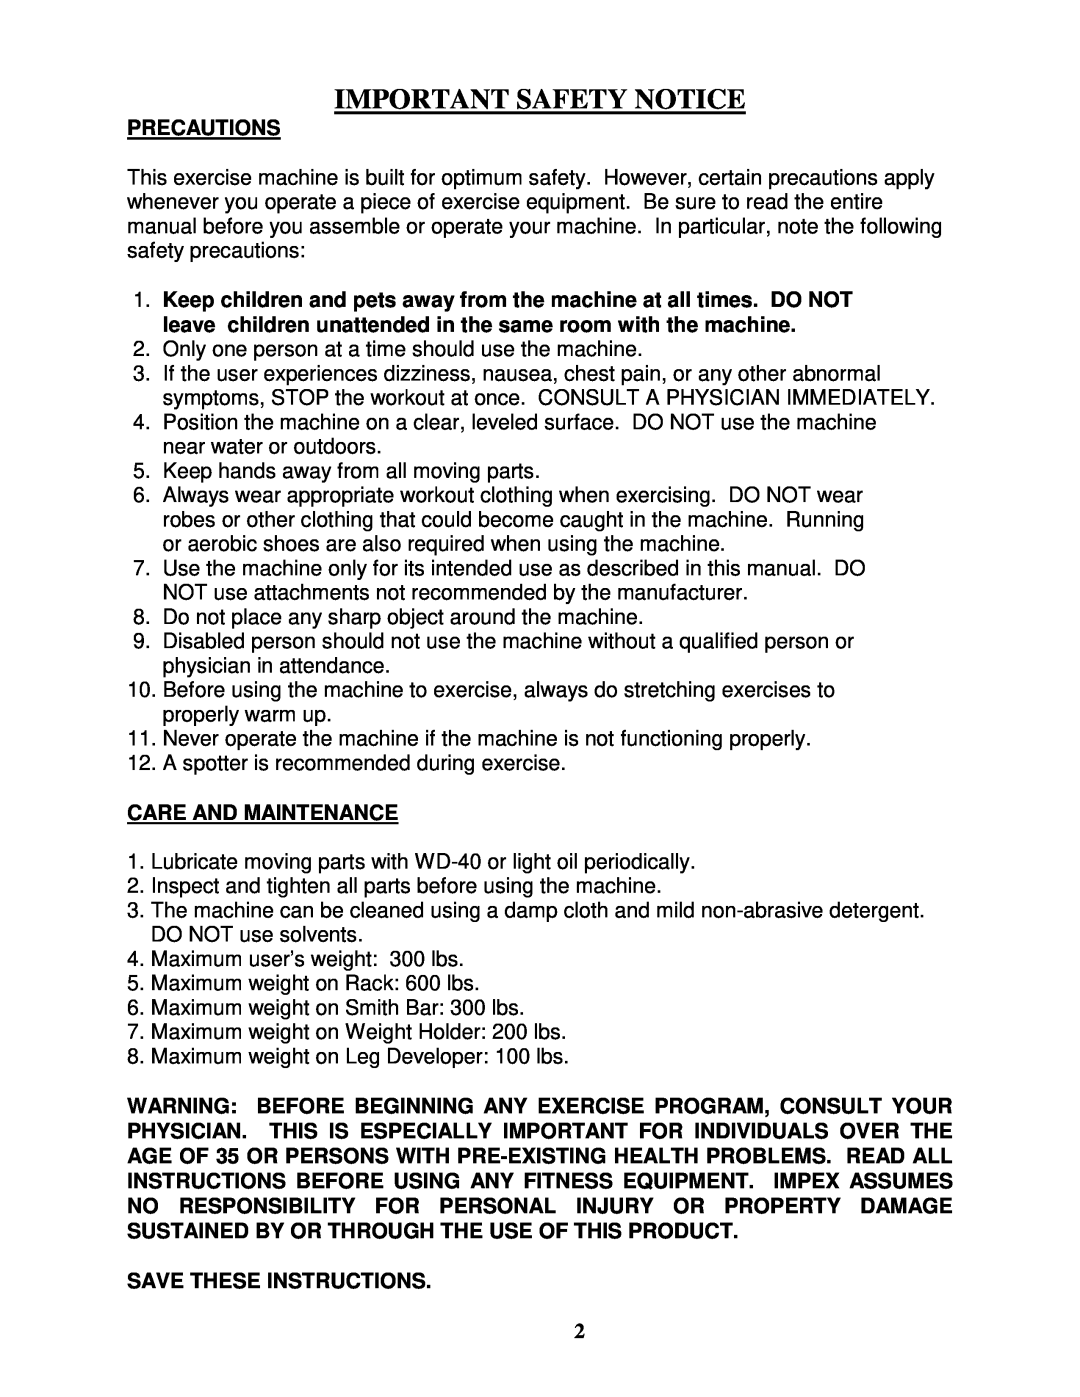 Impex MP-3105 manual Important Safety Notice, Precautions, Care And Maintenance, Save These Instructions 